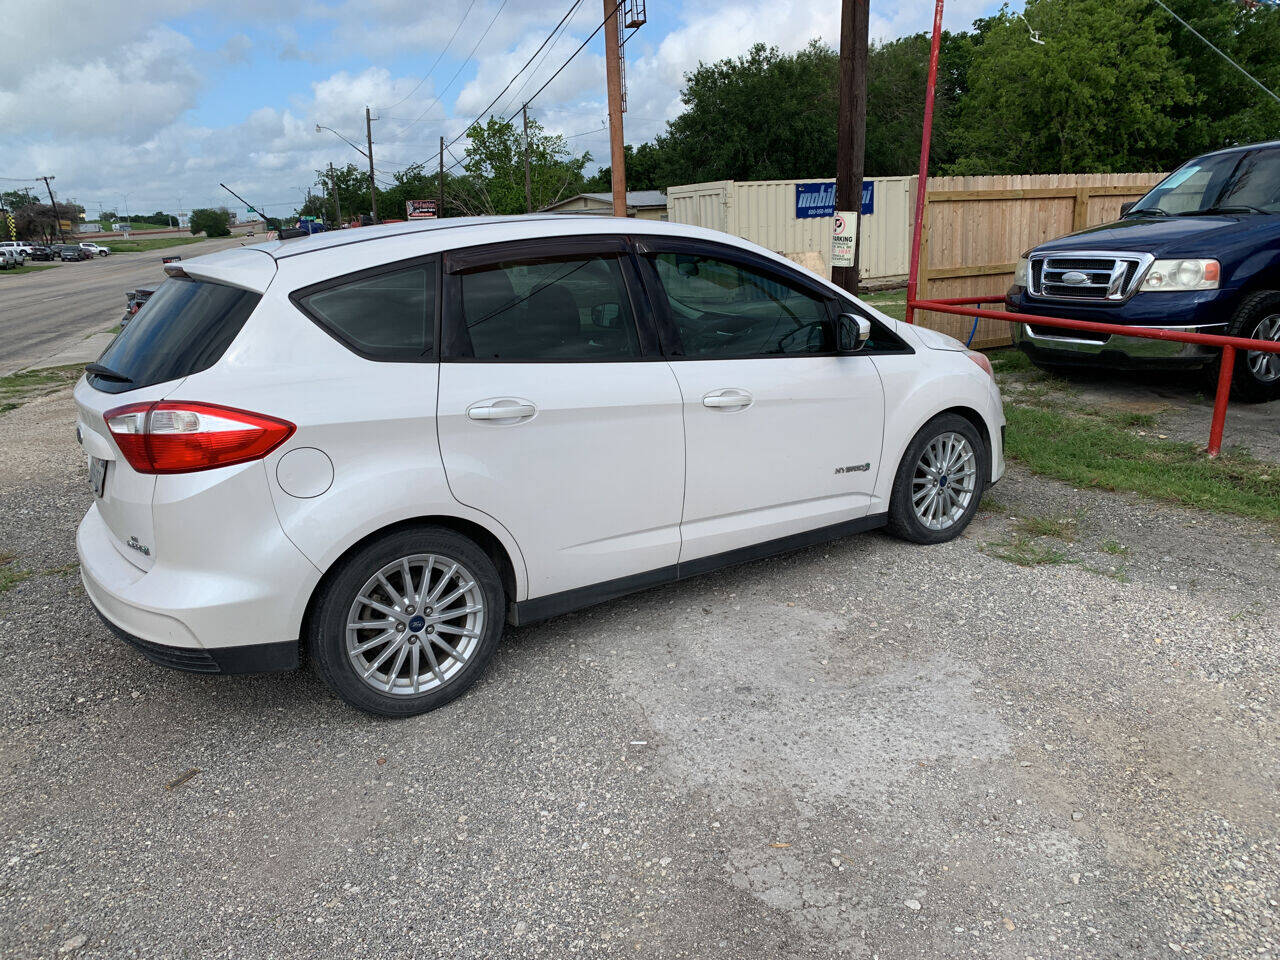 Ford C Max For Sale In Texas Carsforsale Com